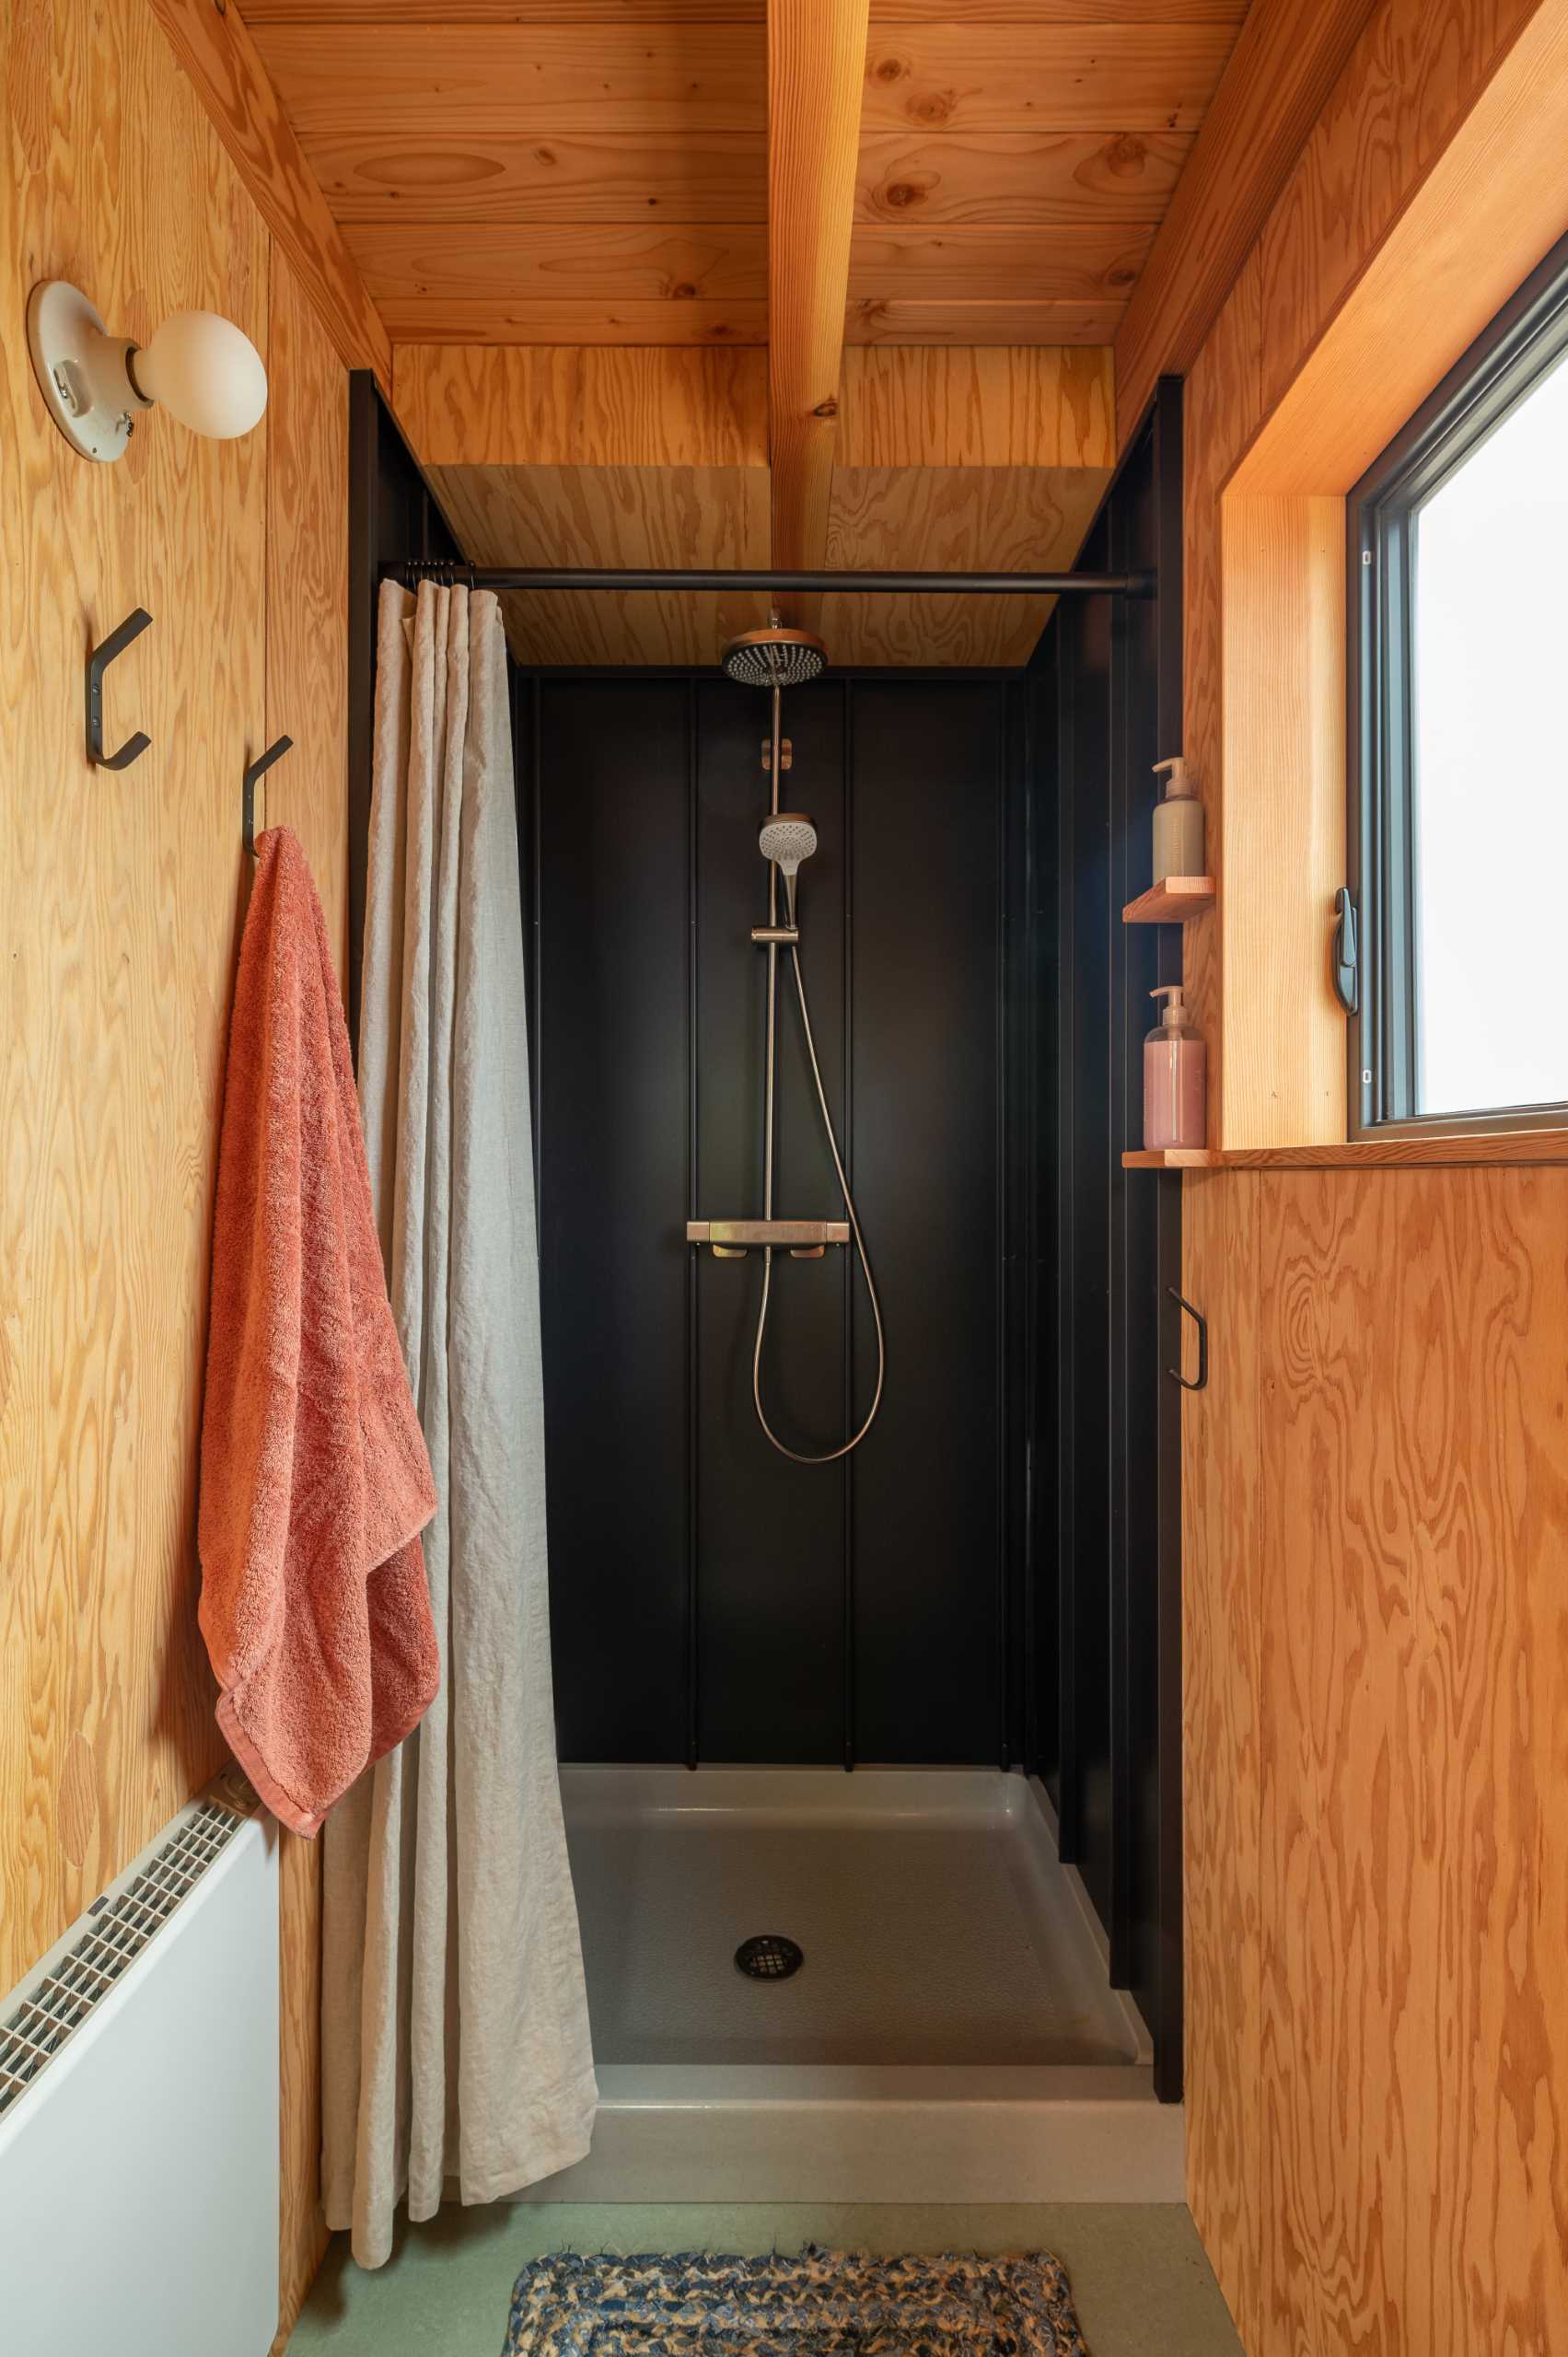 The shower in this cabin has been lined with low gloss black standing seam metal roofing.